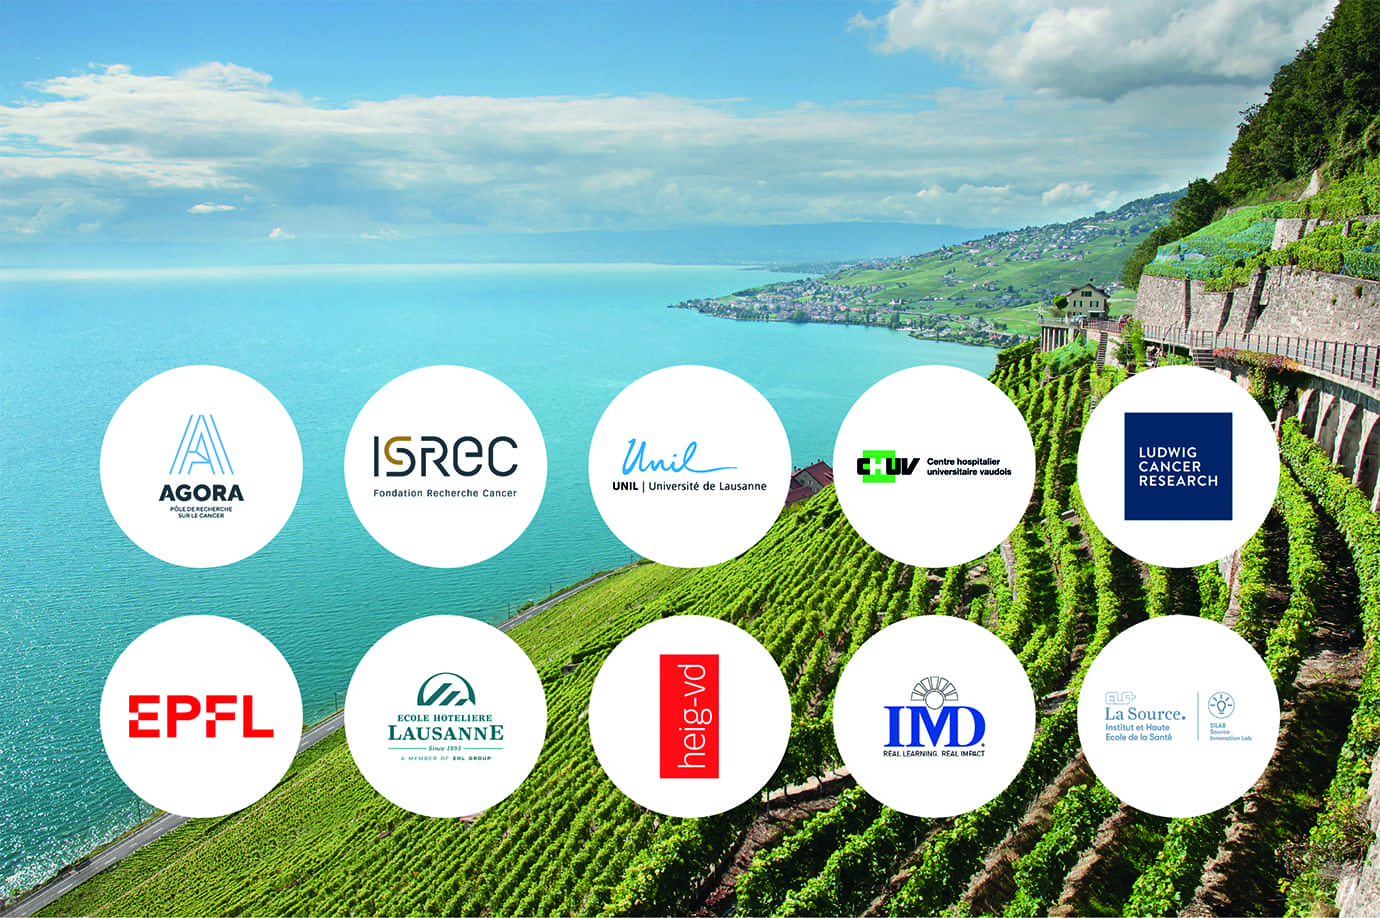 Lausanne is home to two of the world’s leading universities and other companies